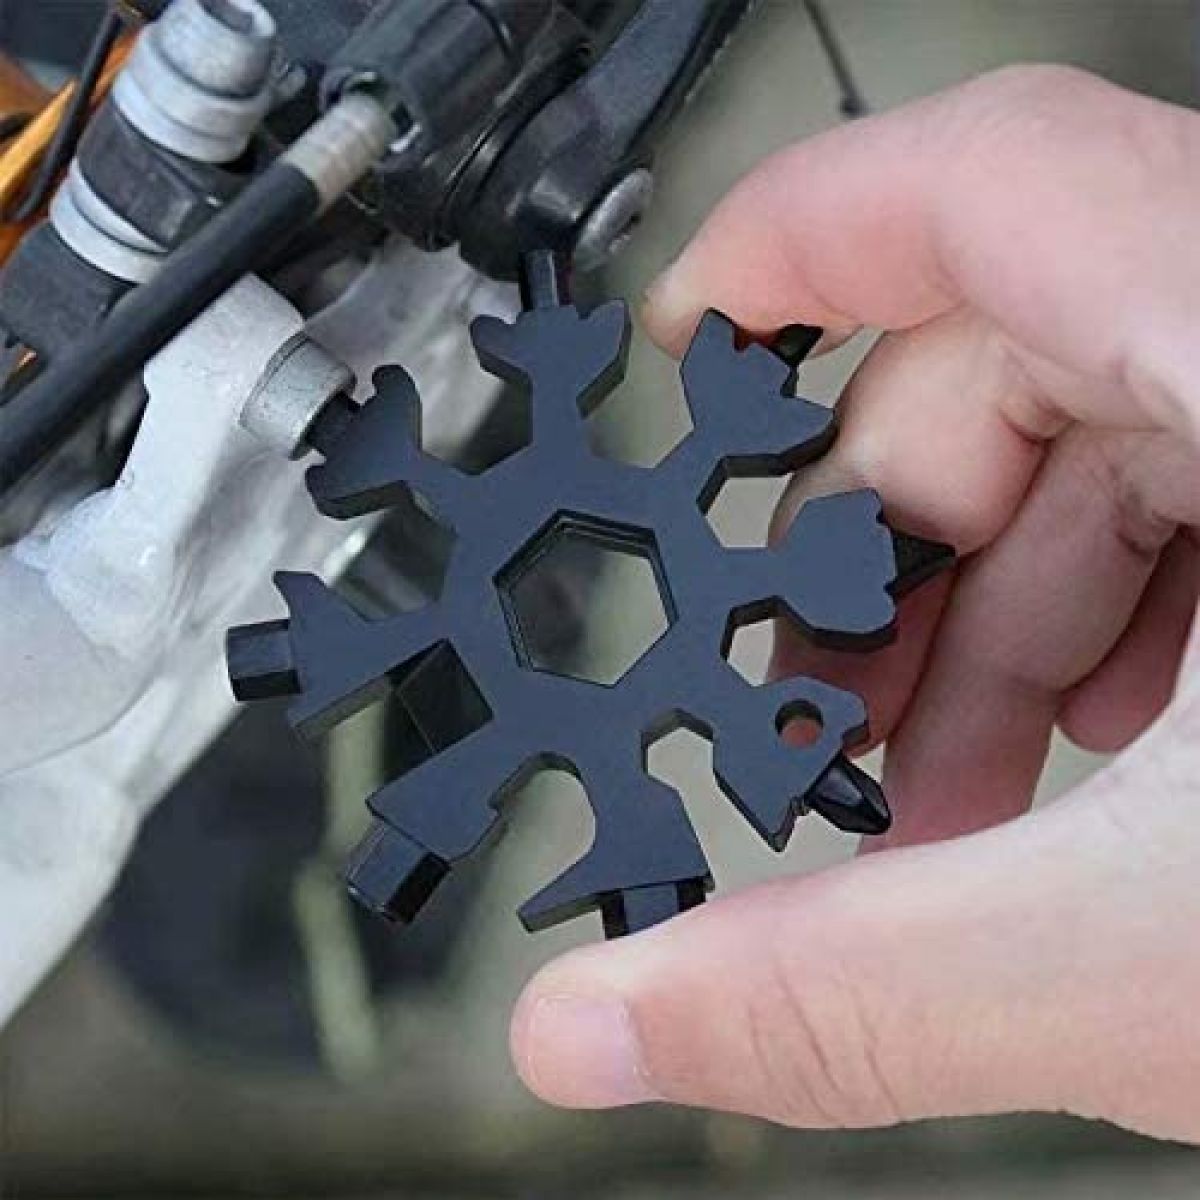 Multifunctional keychain "Snowflake" made of stainless steel